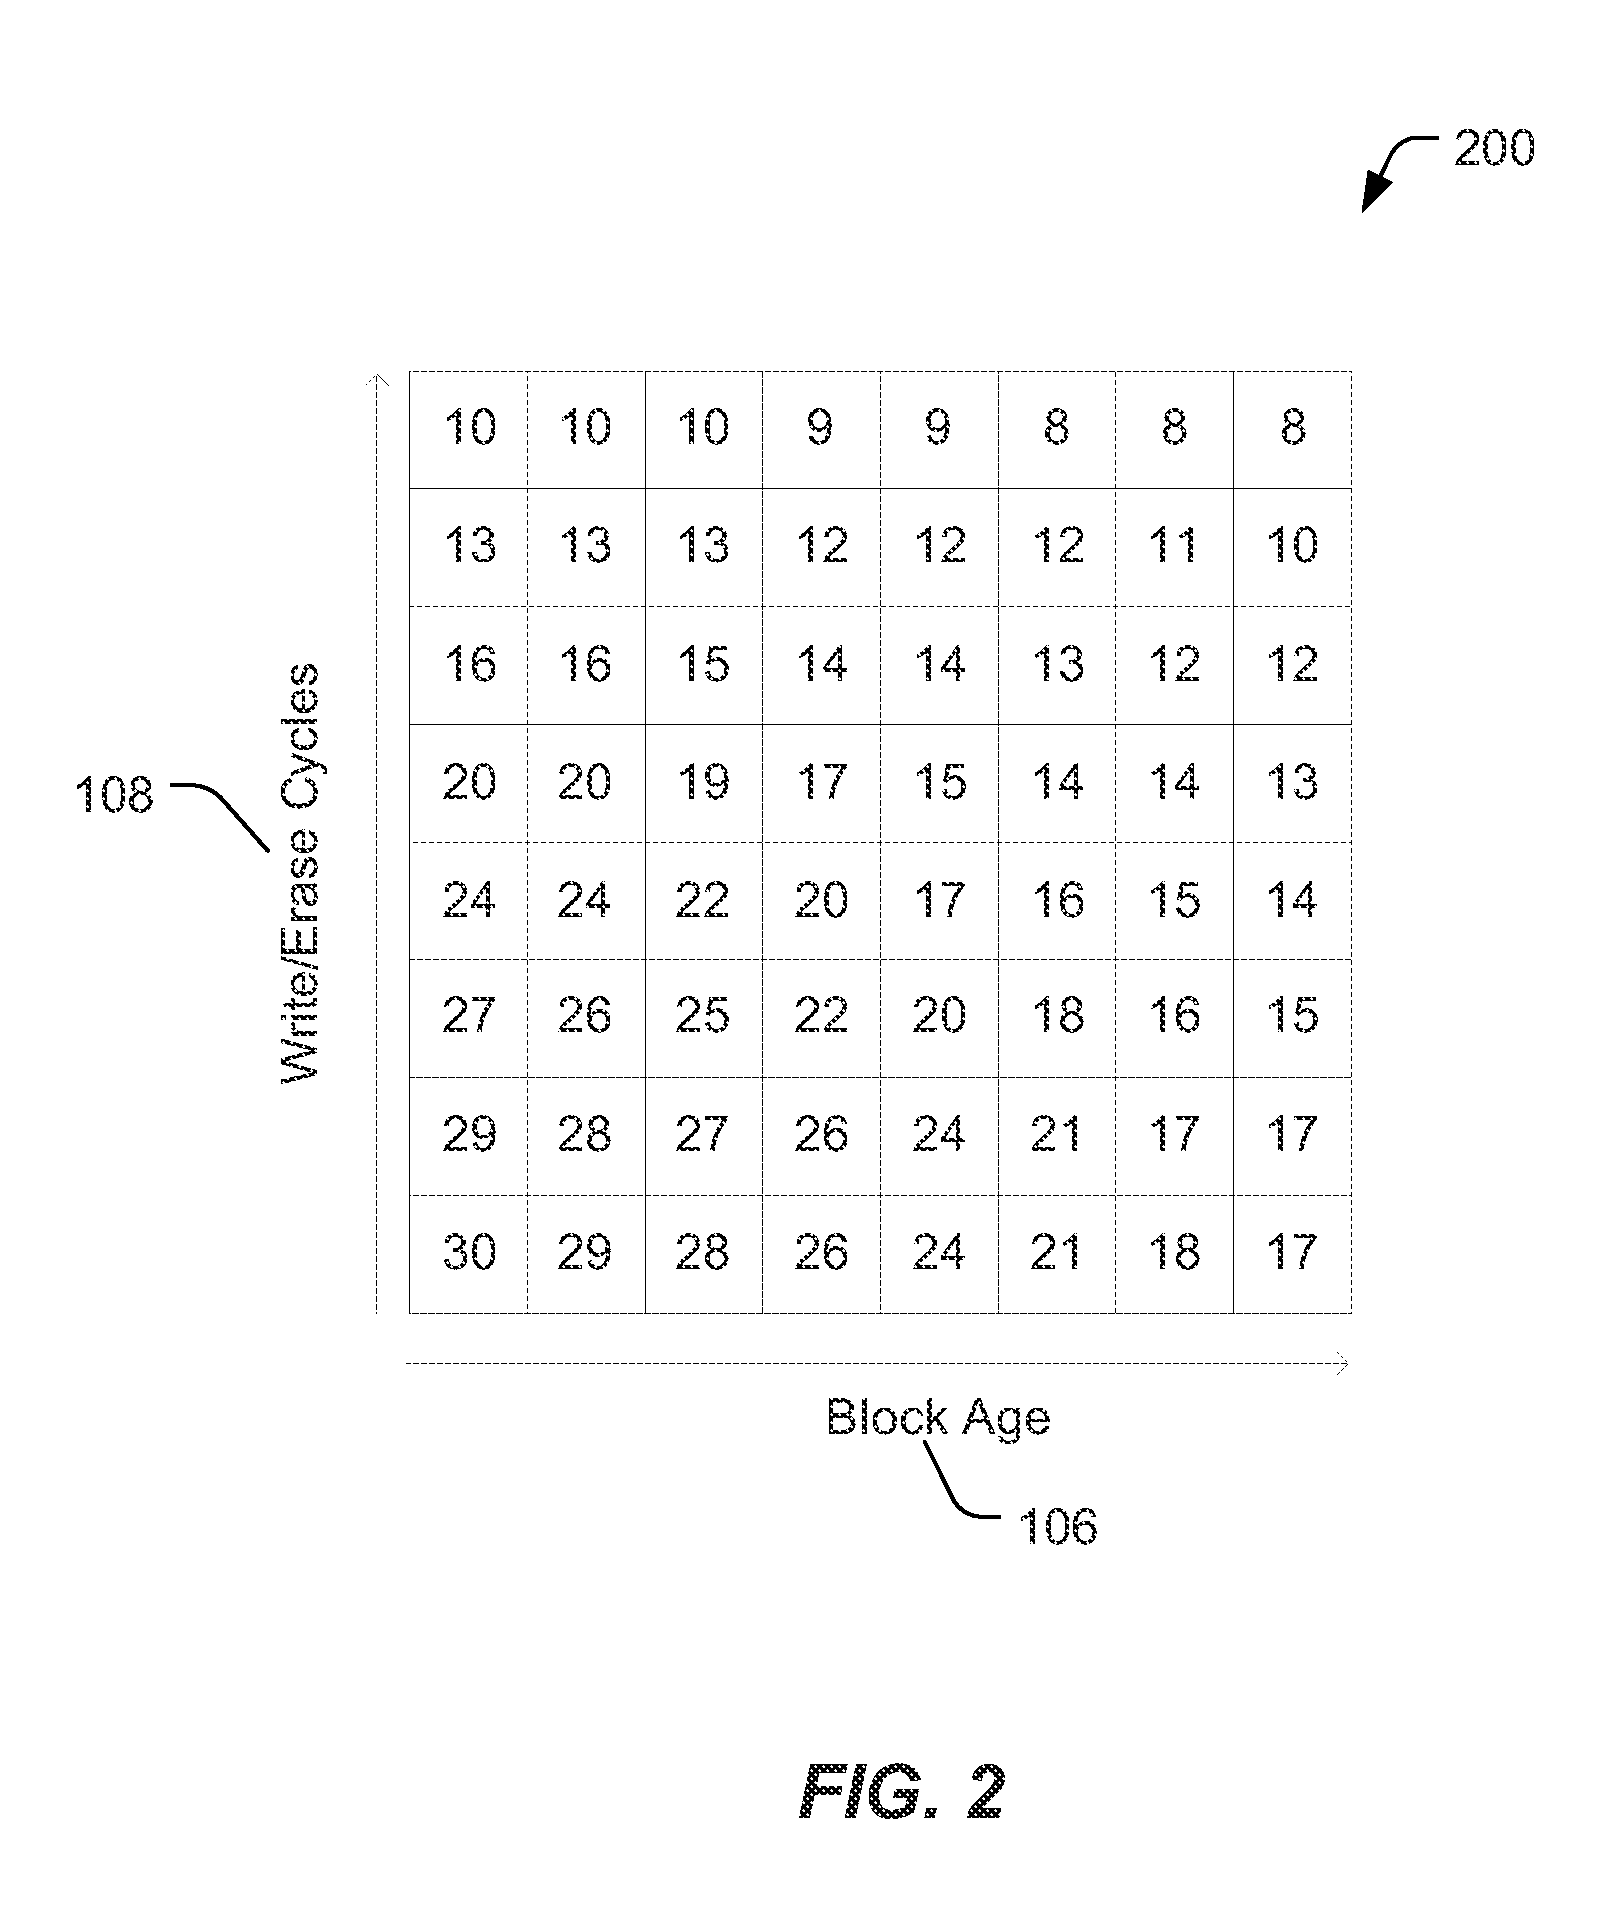 System and method of copying data